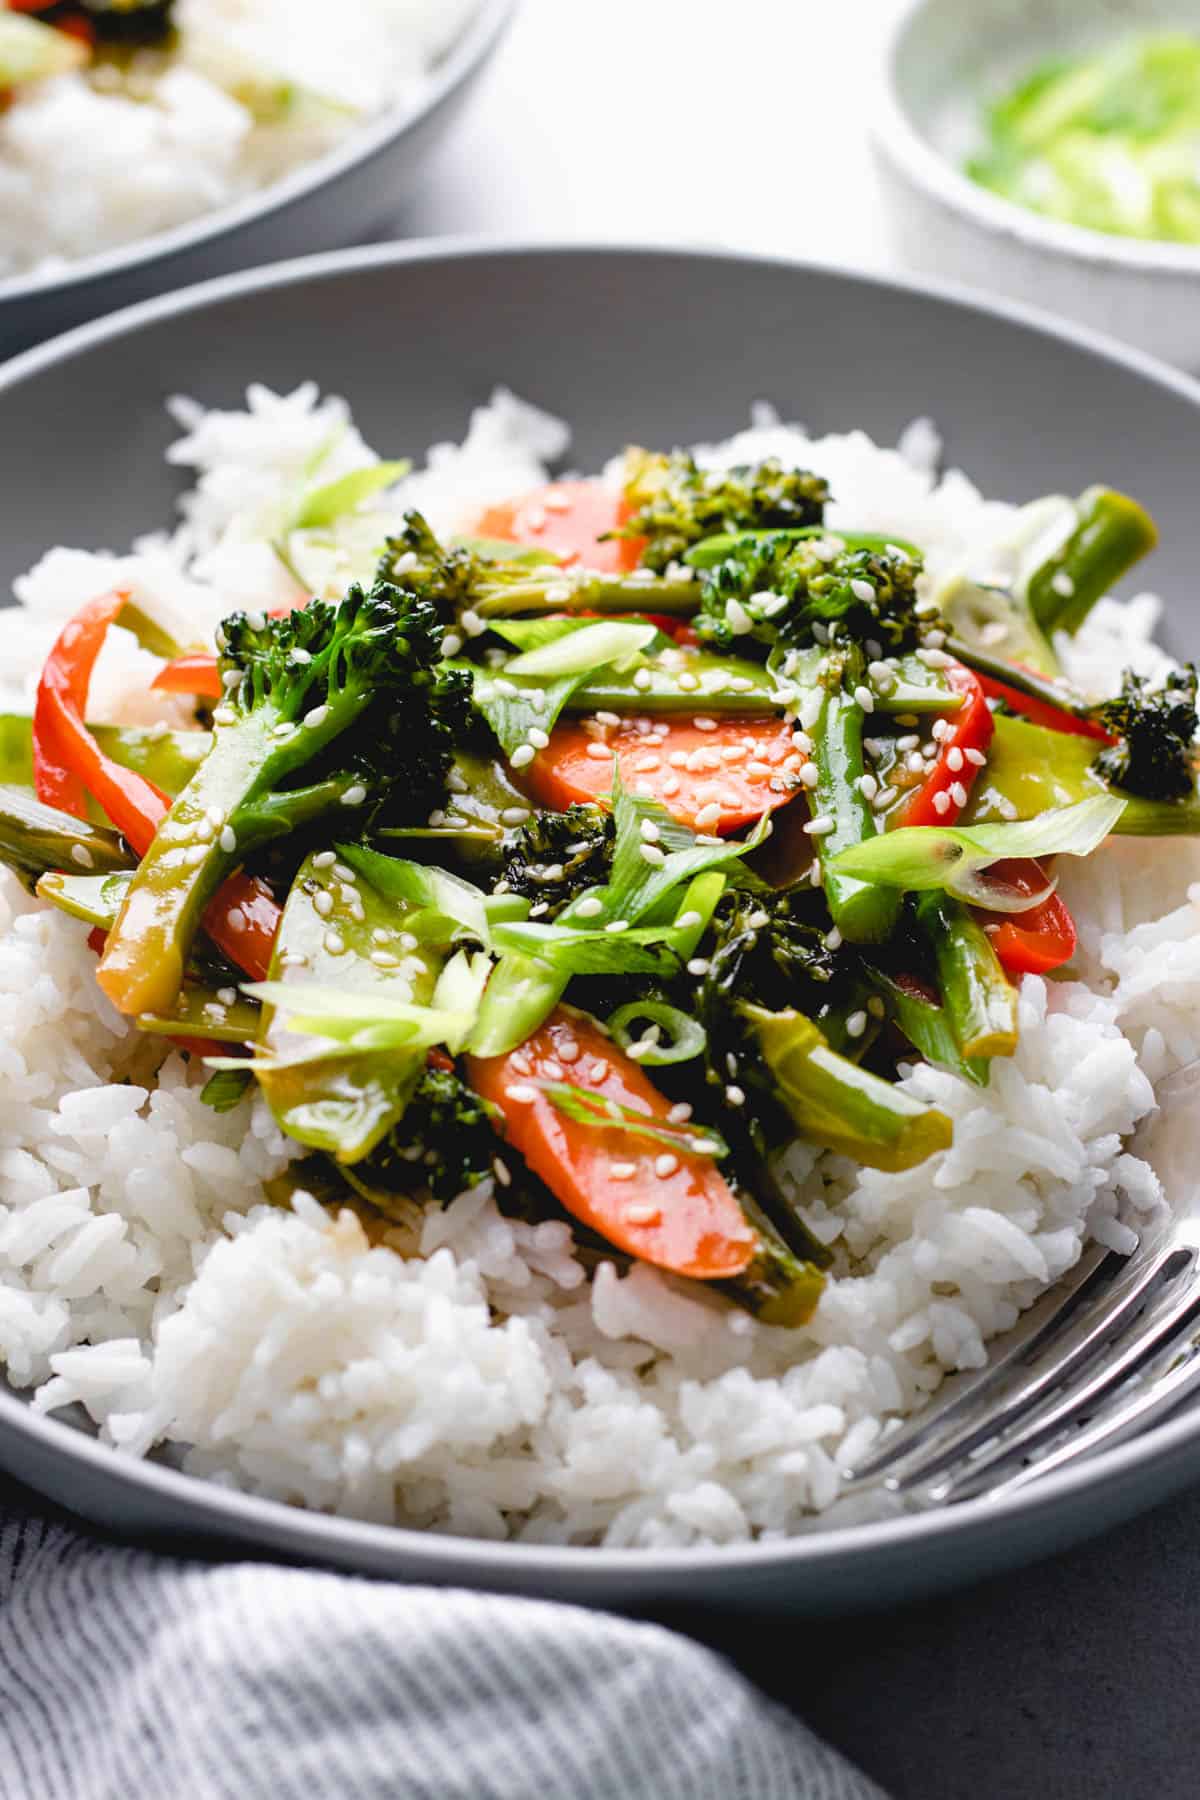 Sauteed broccoli, carrots, snow peas, and red bell pepper in teriyaki sauce over white rice in a bowl.